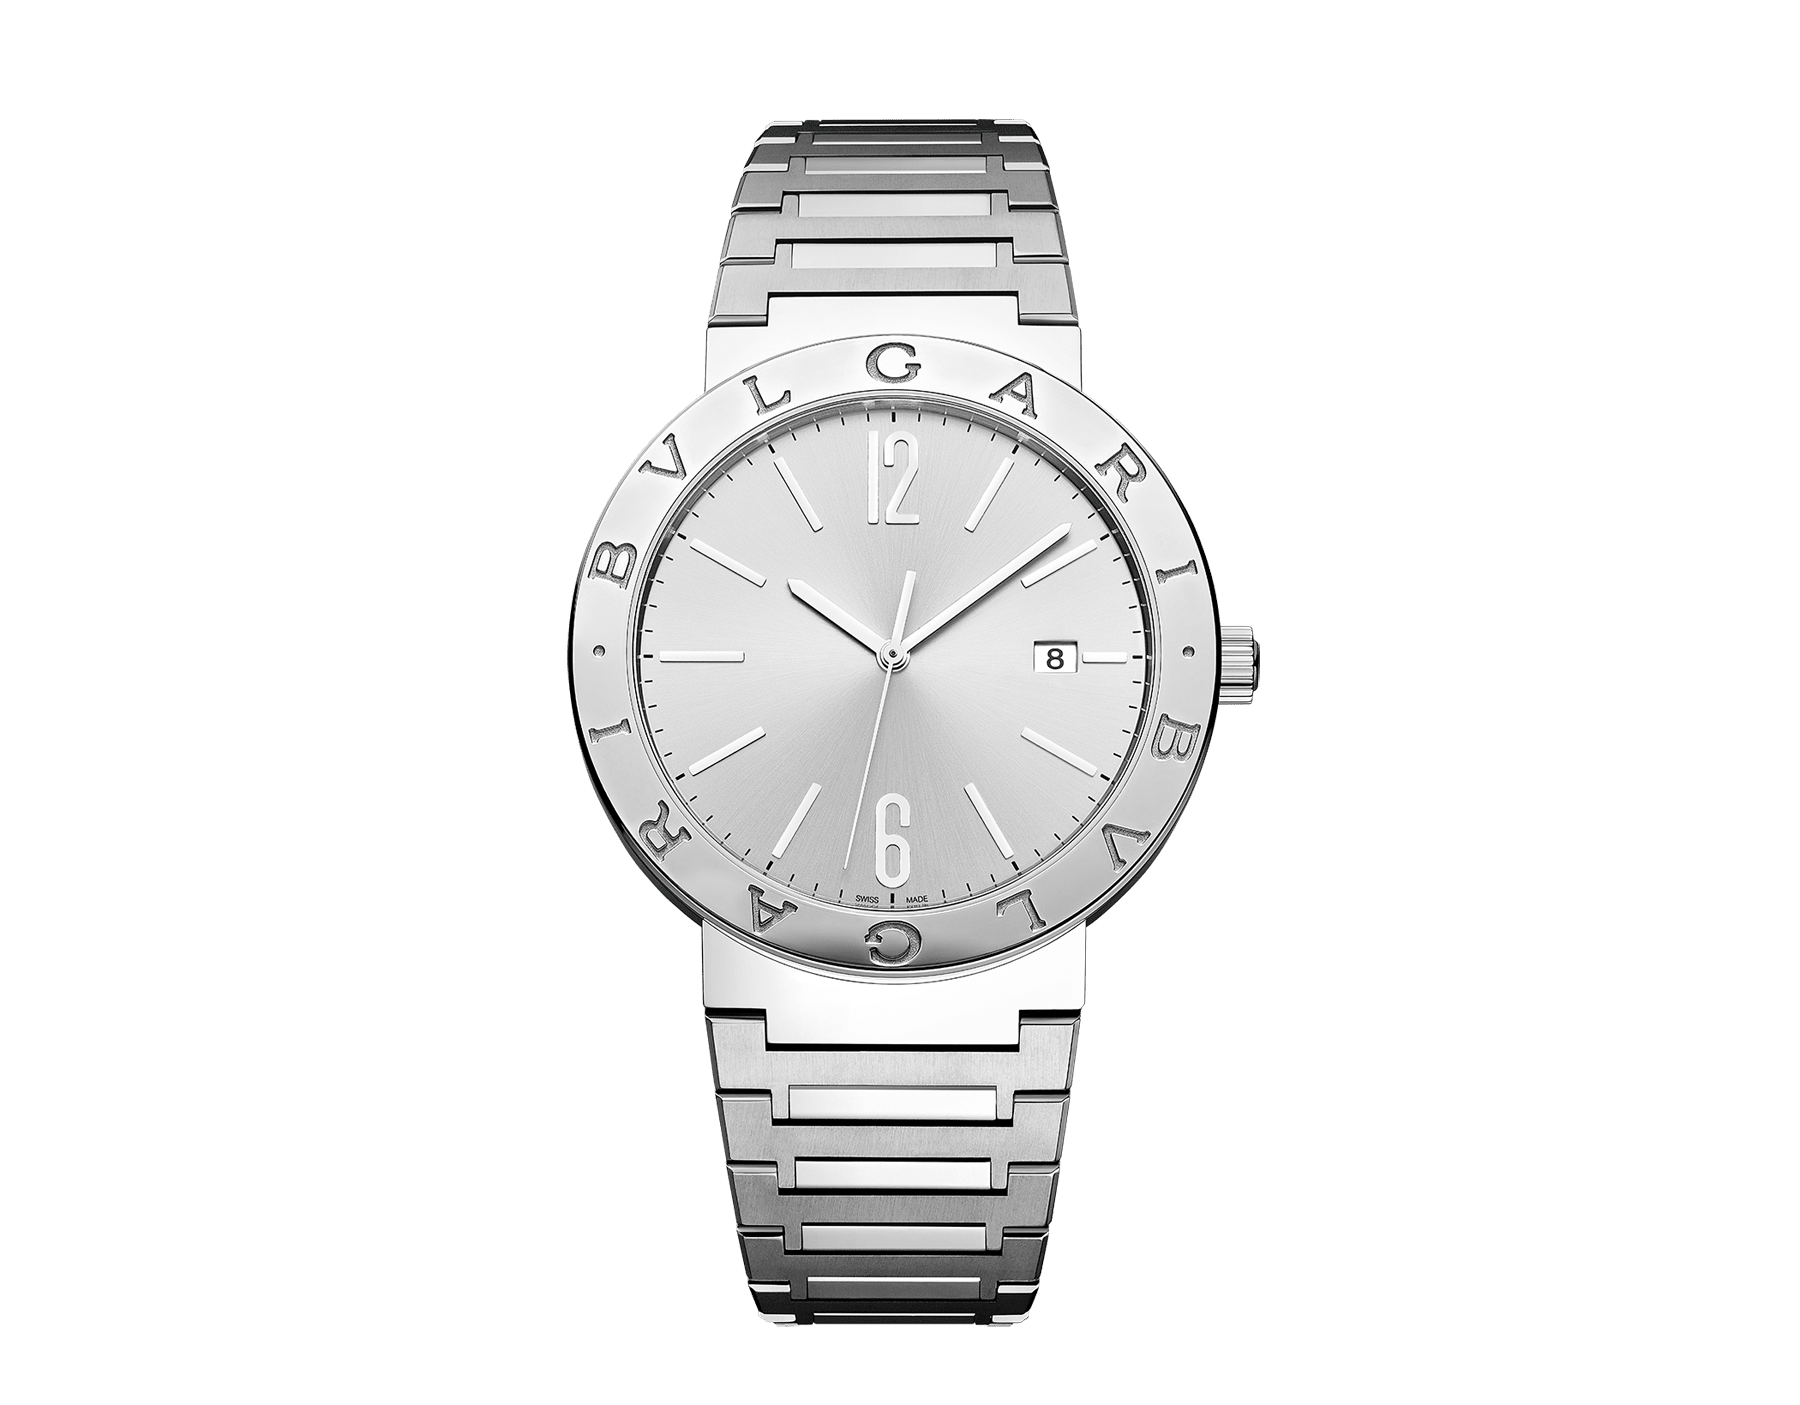 BULGARI BULGARI watch with mechanical manufacture movement, automatic winding and date, stainless steel case and bracelet, stainless steel bezel engraved with double logo and silvered sunray dial. Water-resistant up to 50 metres 103652 image 1